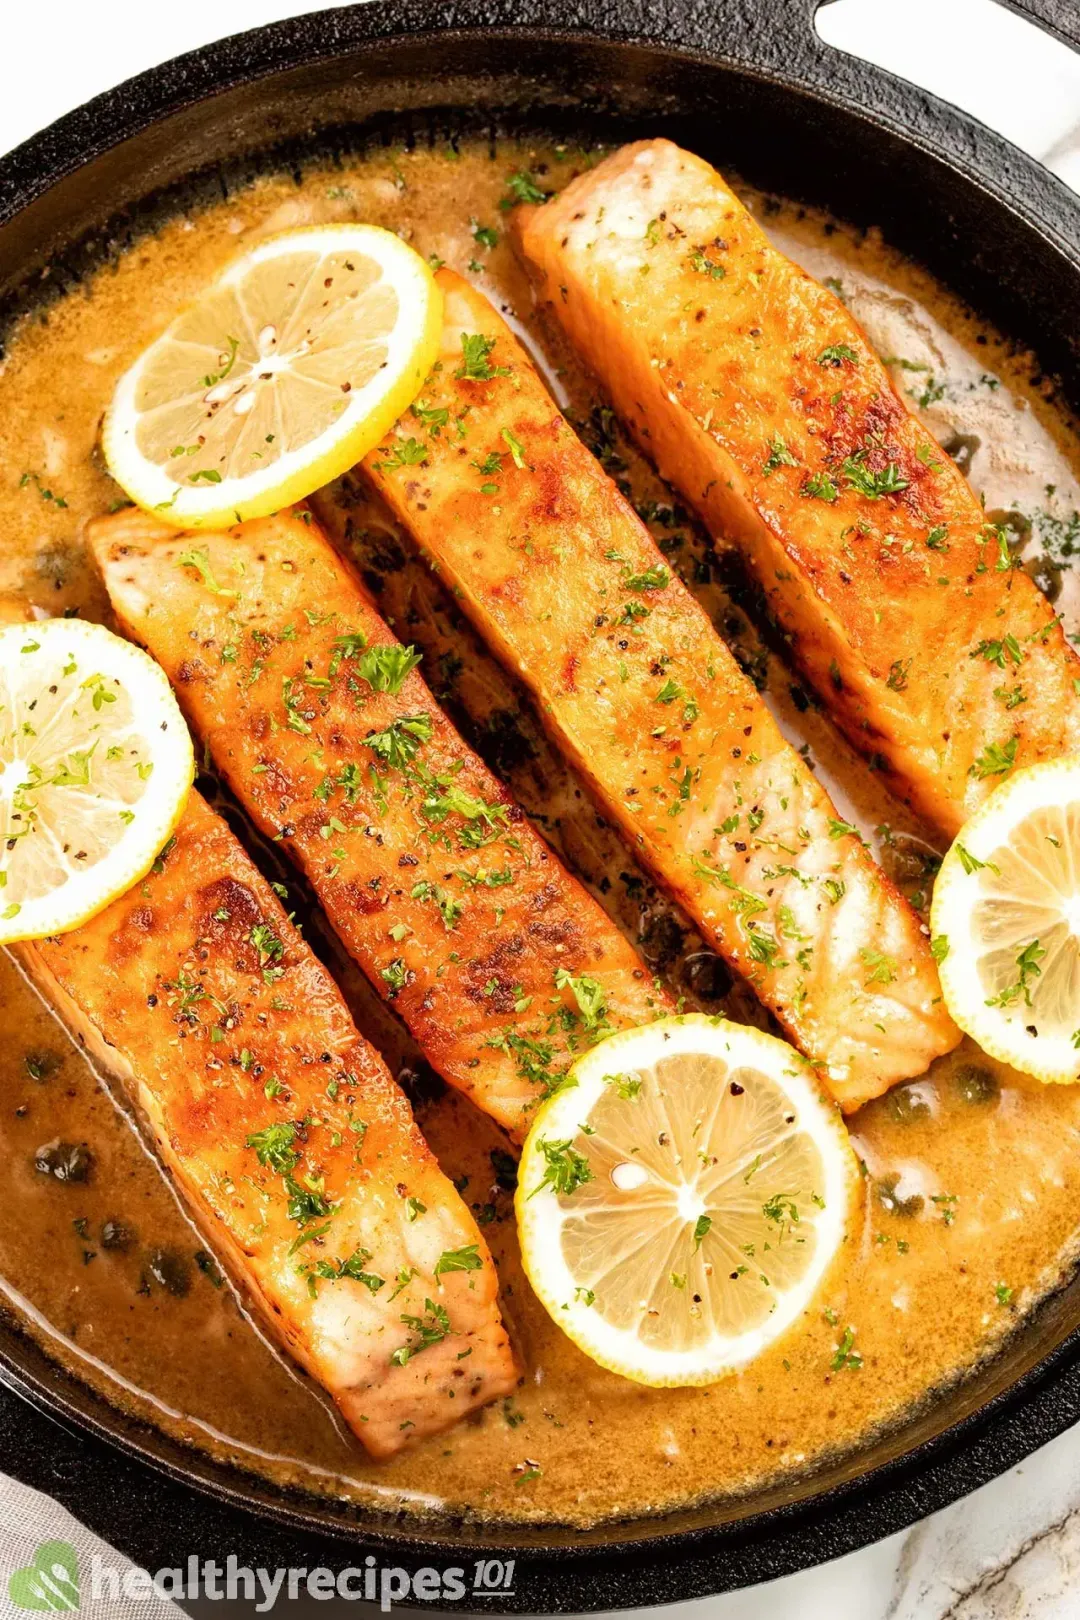 Four salmon filets sitting in a creamy cooking juice in a skillet are topped with four lemon slices.